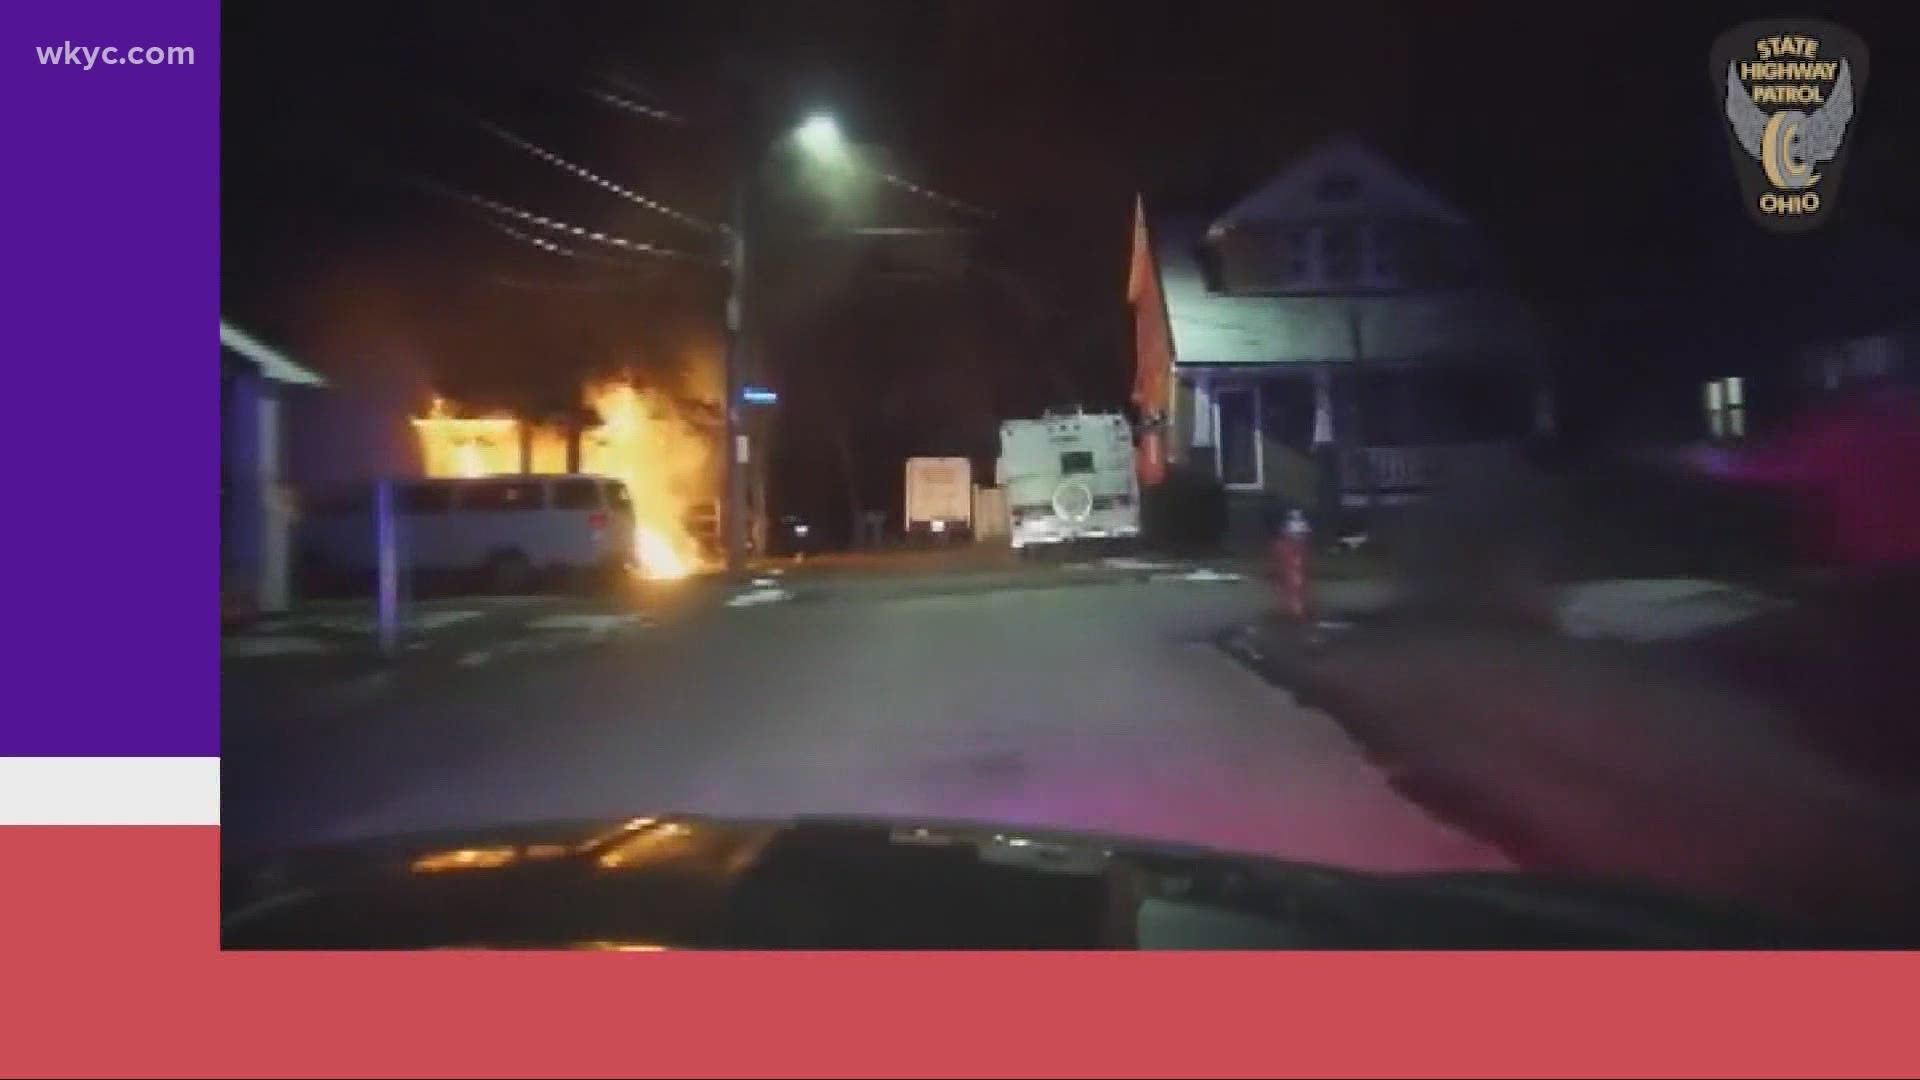 After a fire broke out in Clevealnd on Saturday night, two Ohio State Highway Patrol troopers along with neighbors, sprung into action. Lynna Lai has more.